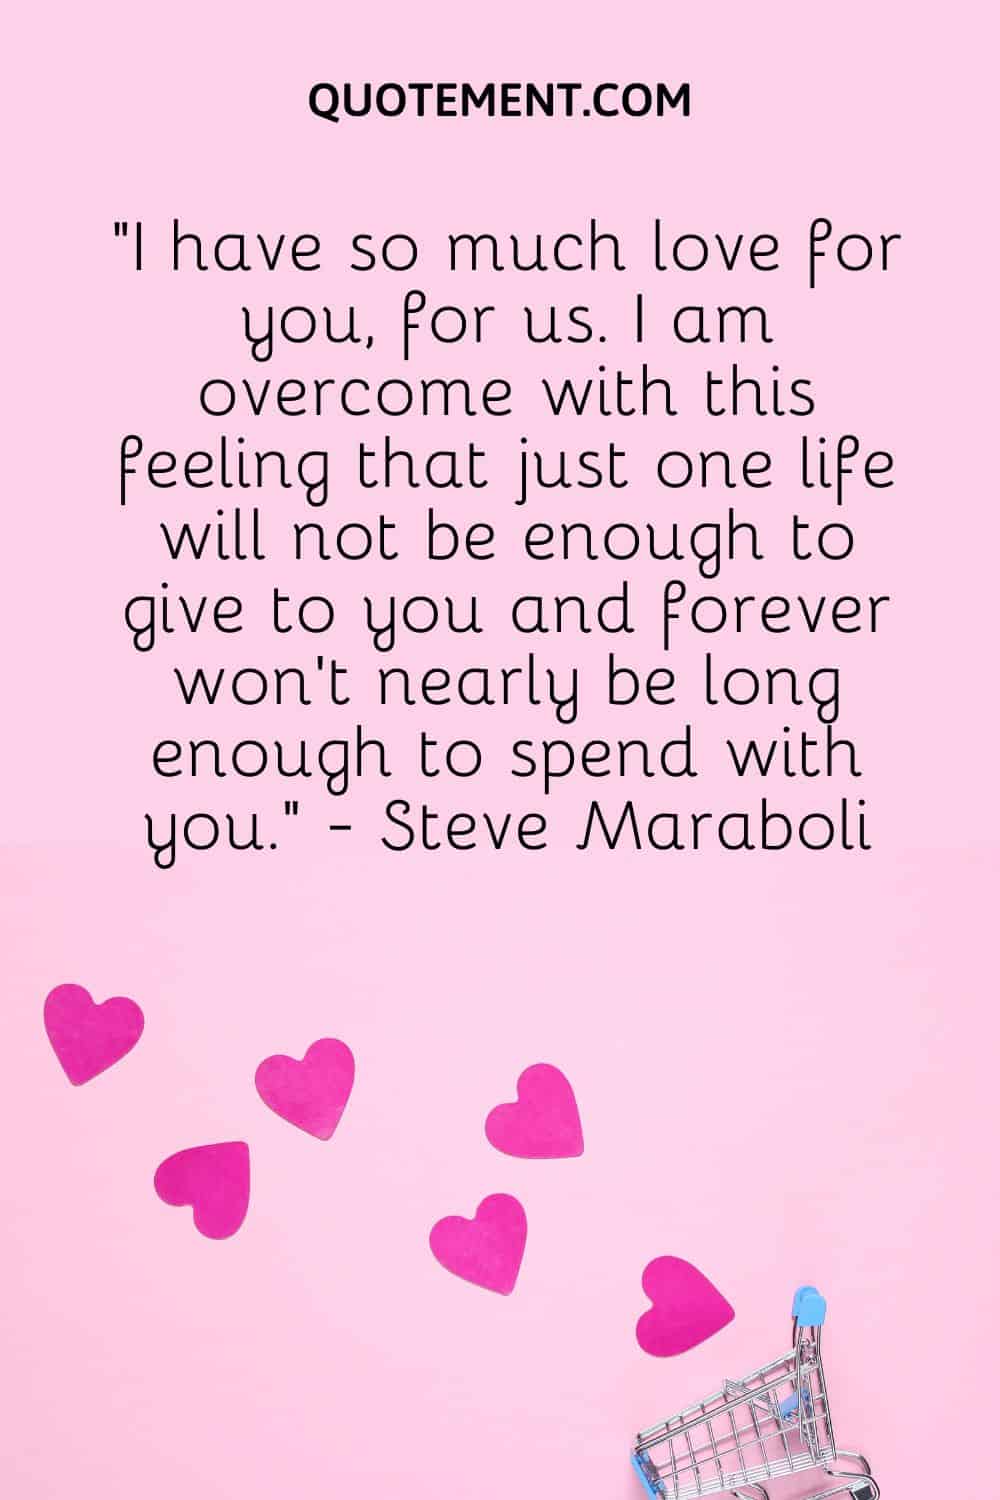 “I have so much love for you, for us. I am overcome with this feeling that just one life will not be enough to give to you and forever won’t nearly be long enough to spend with you.” - Steve Maraboli